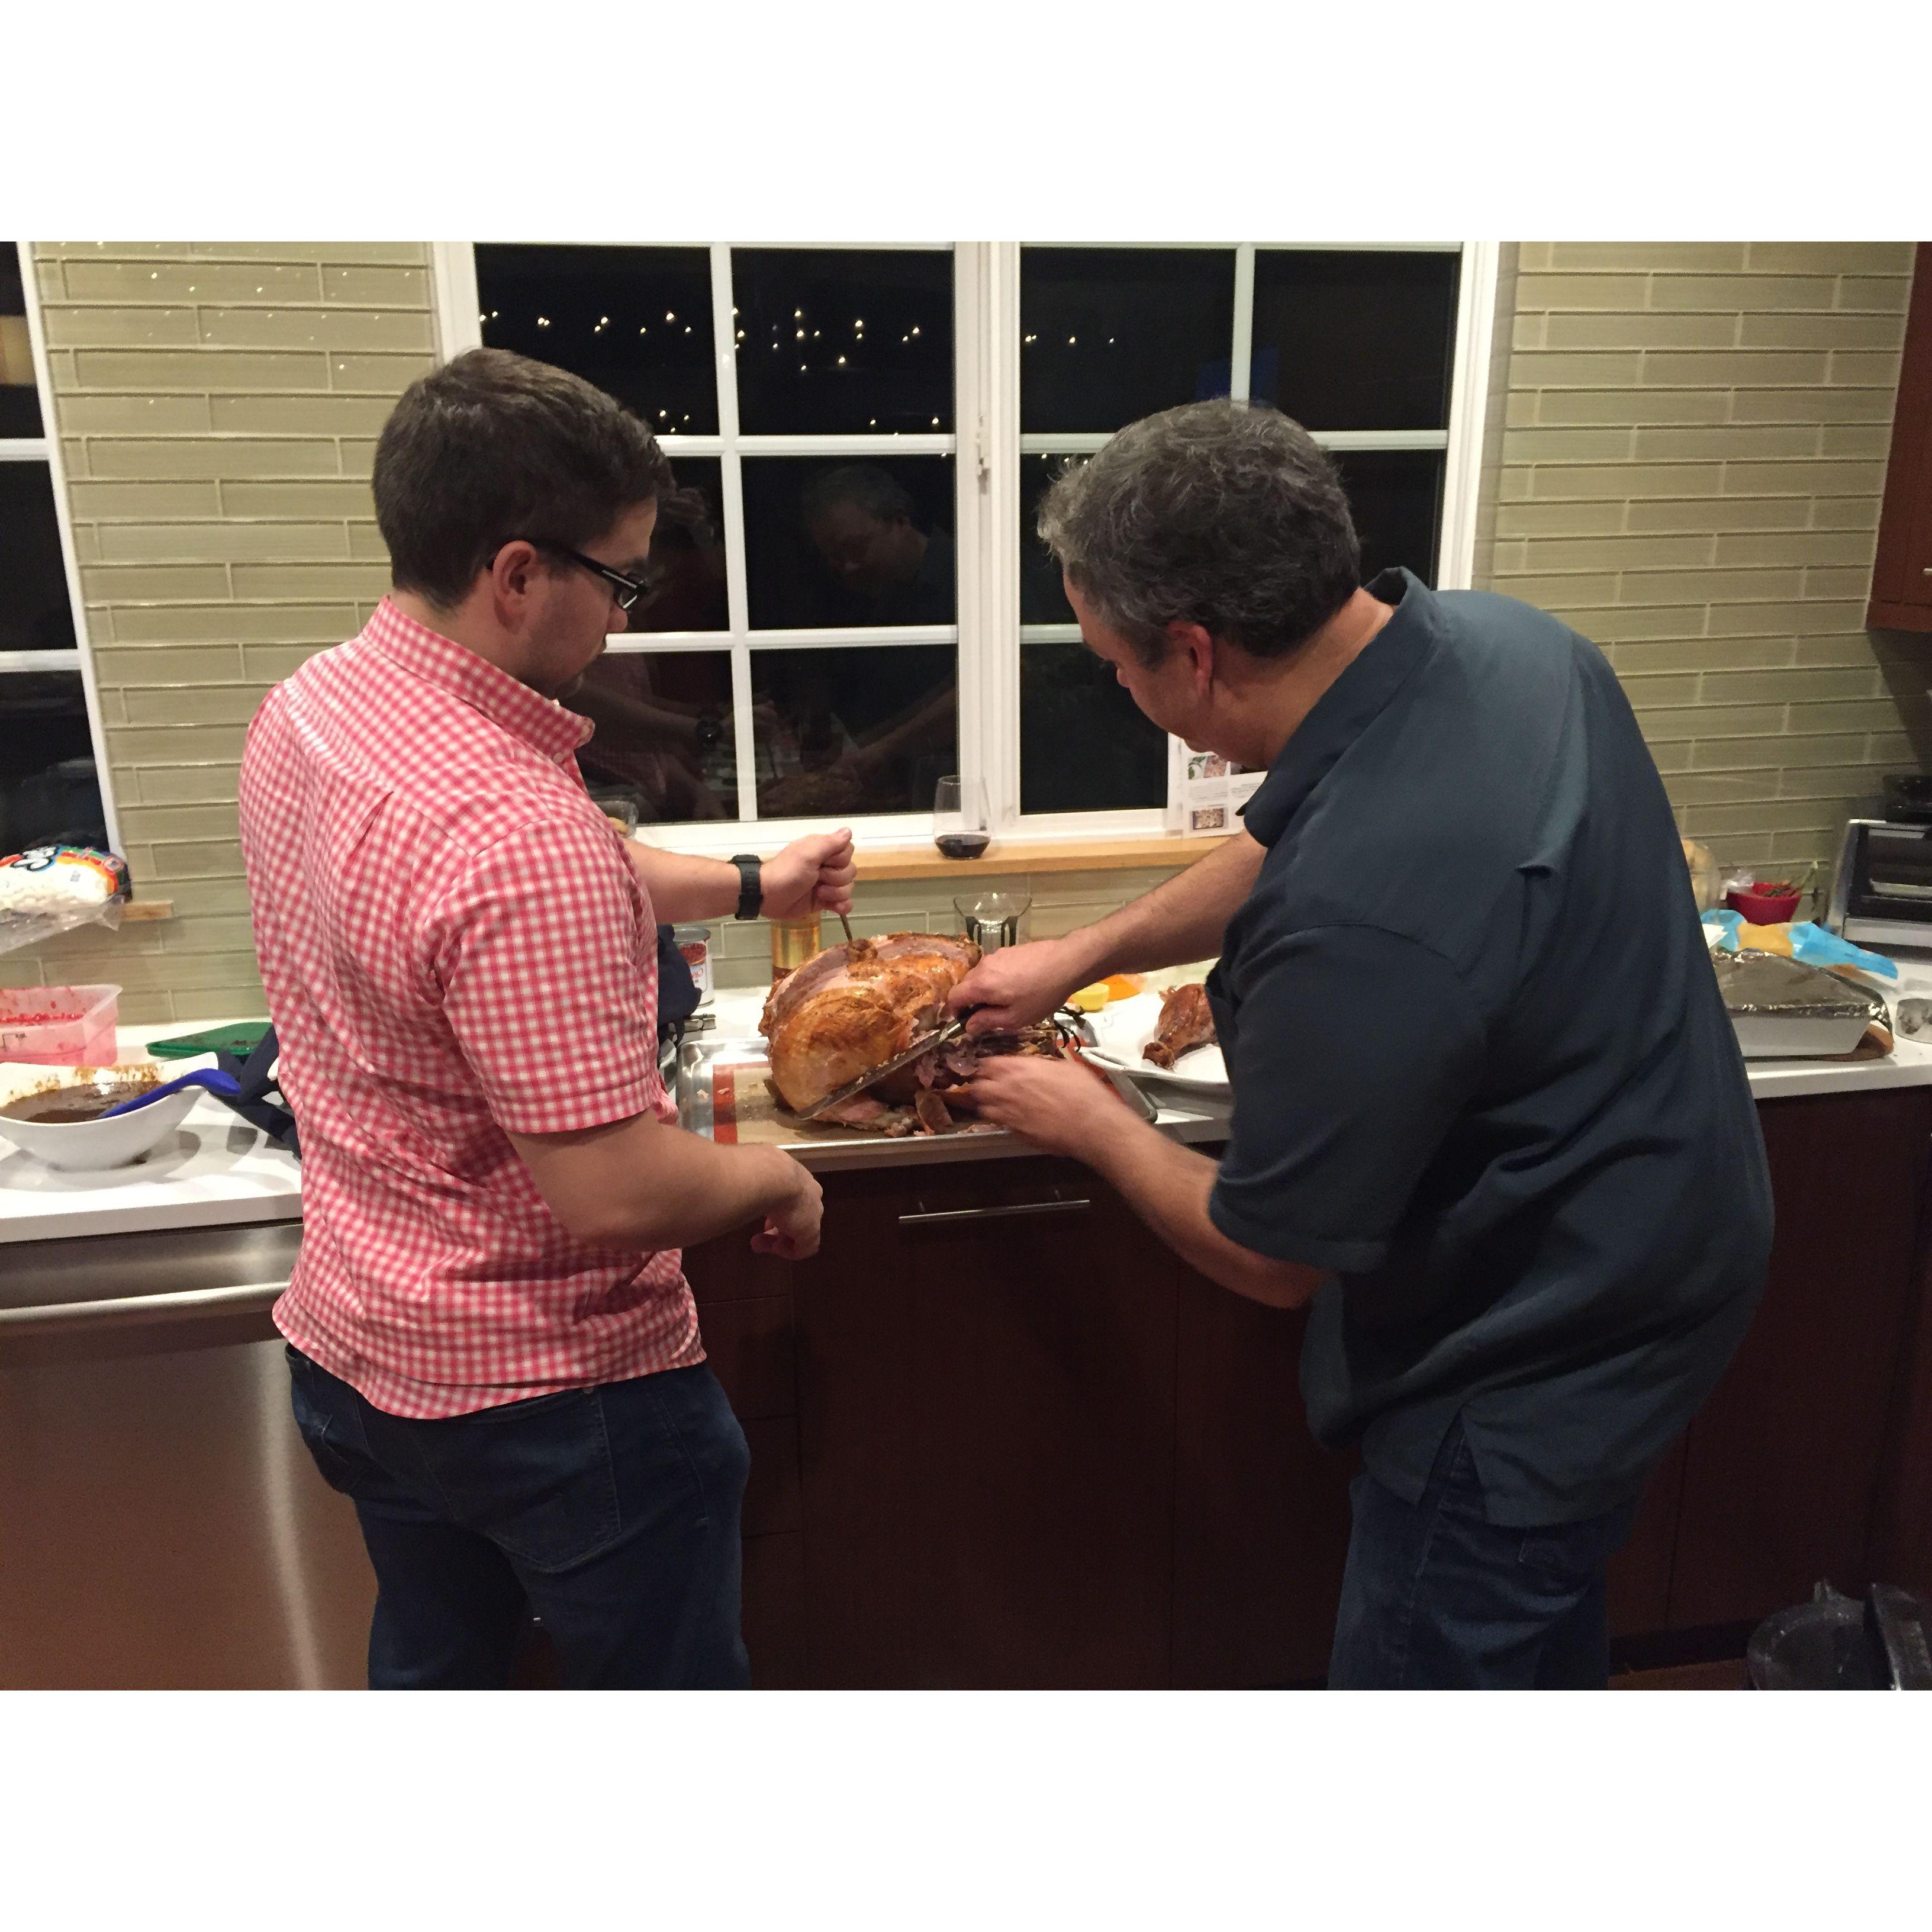 Kaleb & Tessa's dad, Brad carving the Thanksgiving Turkey together in 2017.